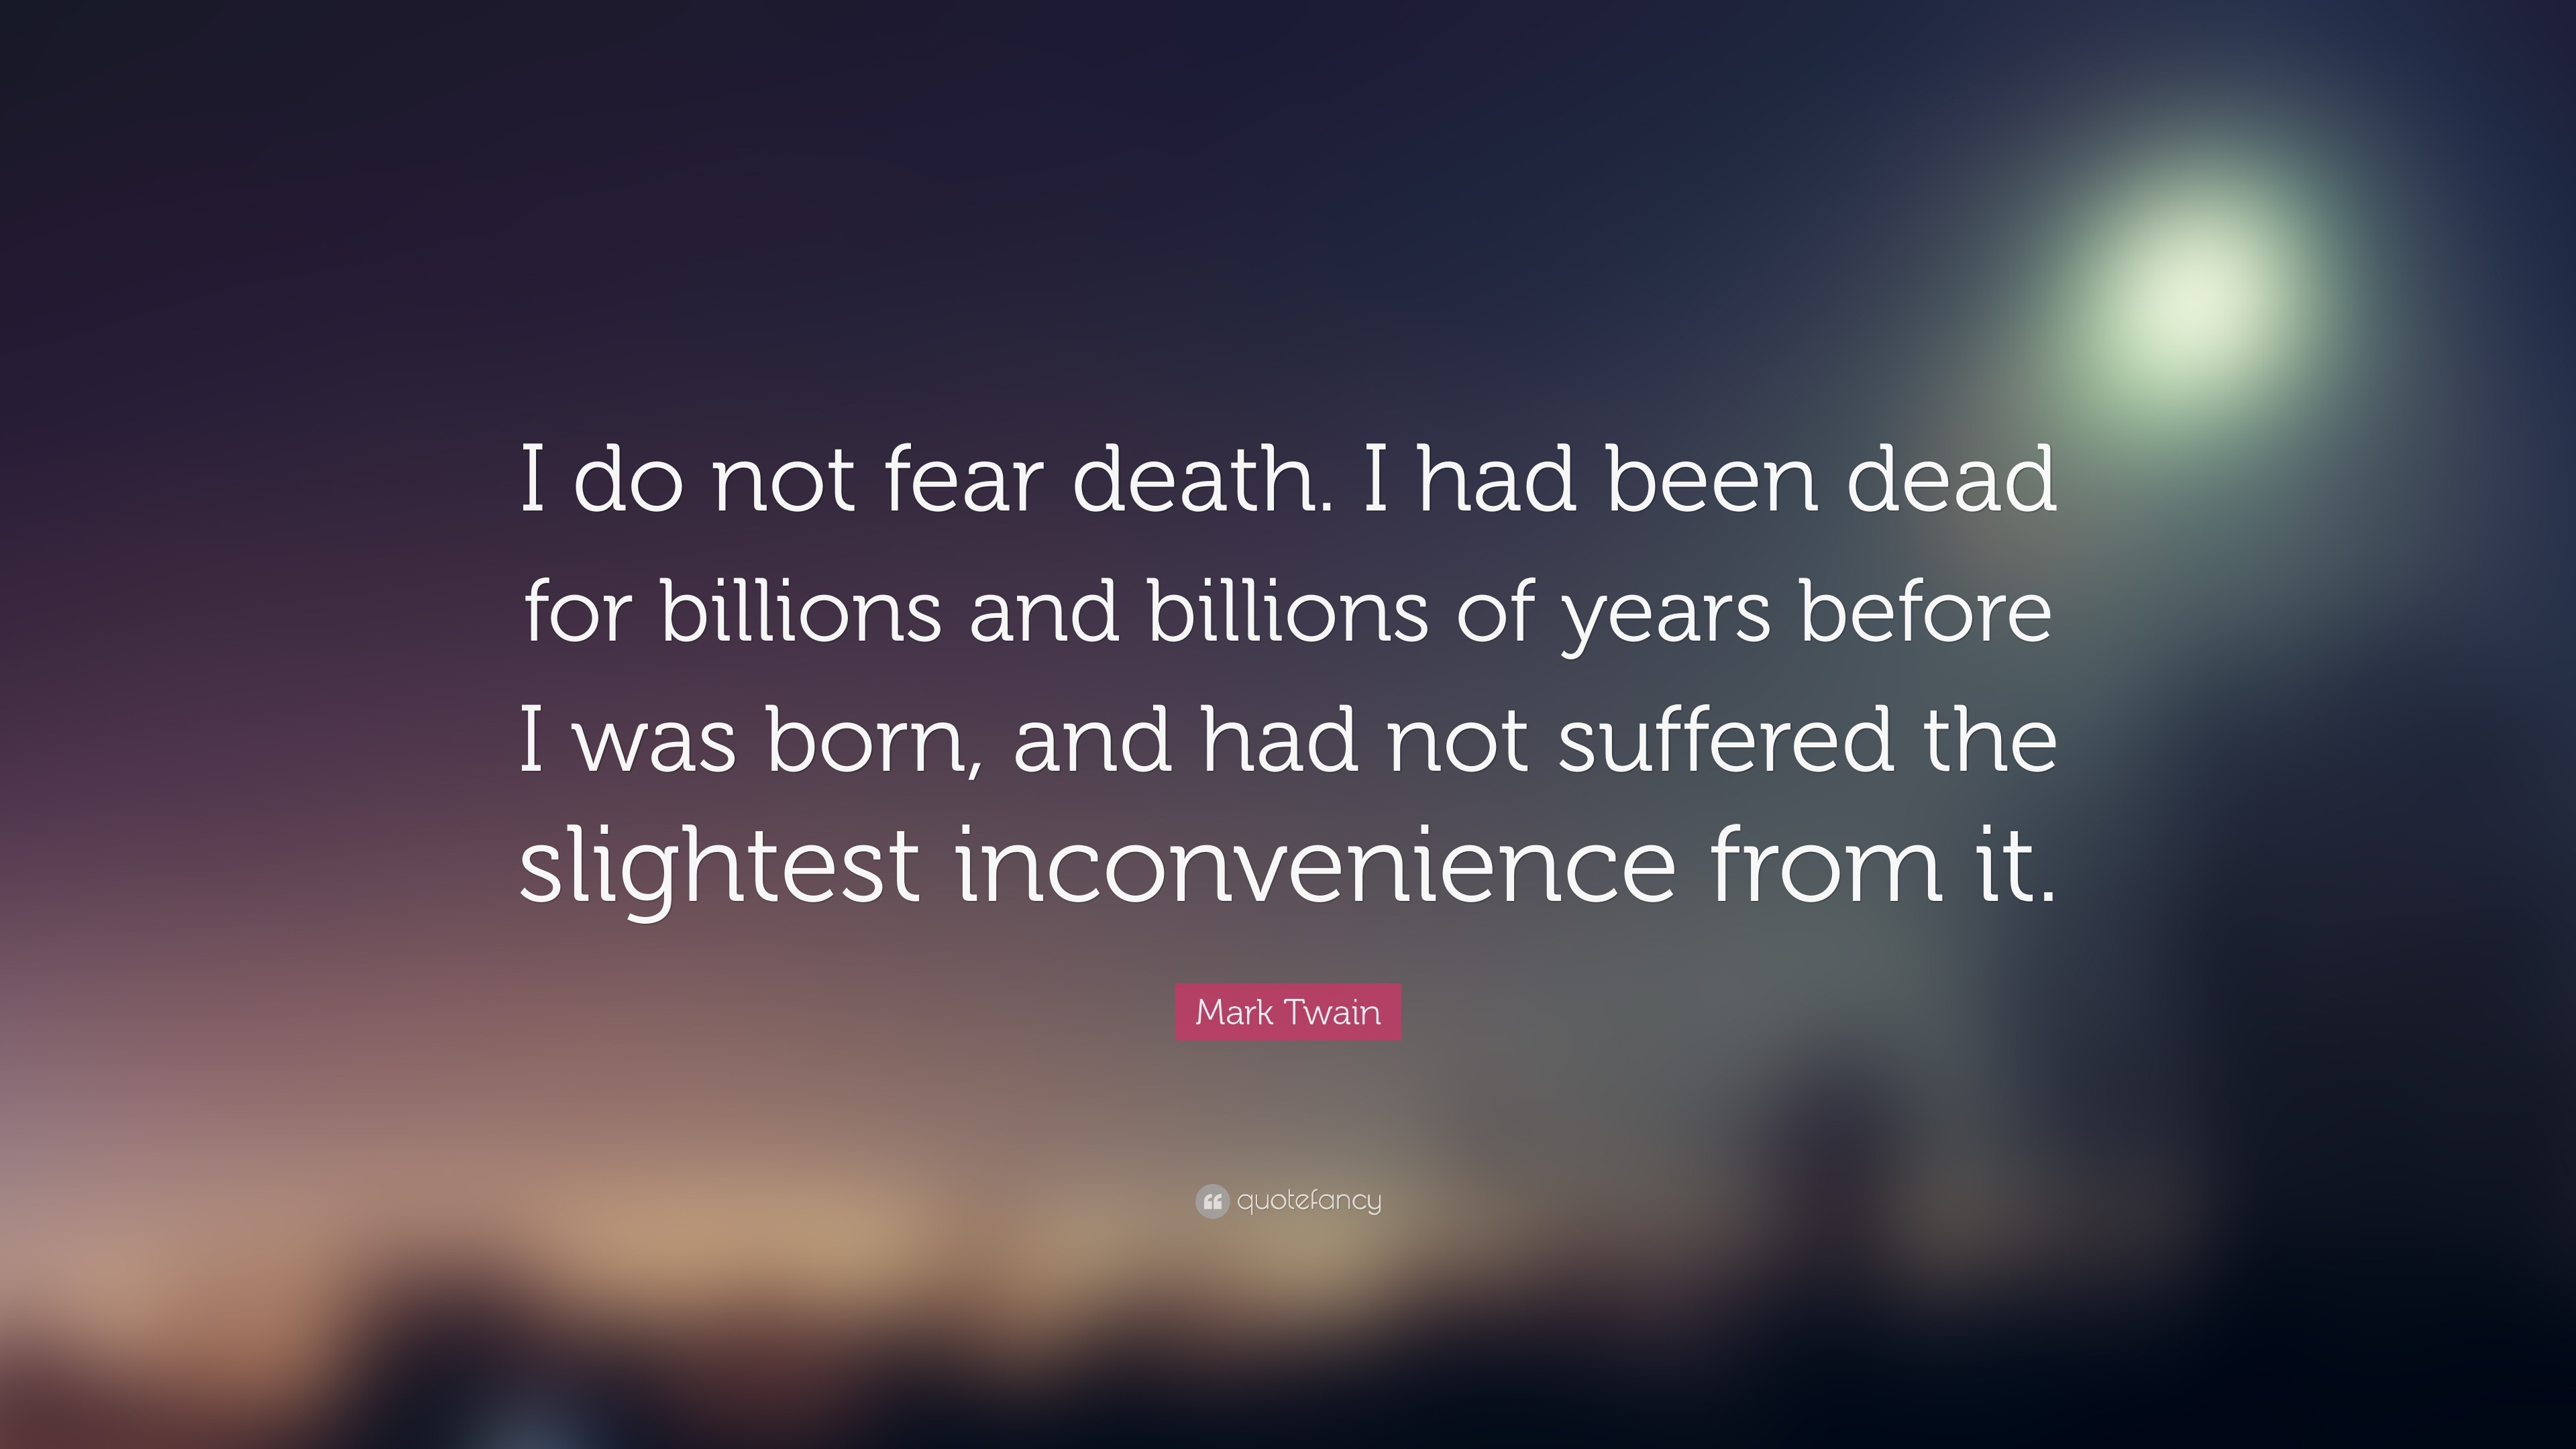 Mark Twain Quote “I do not fear I had been dead for